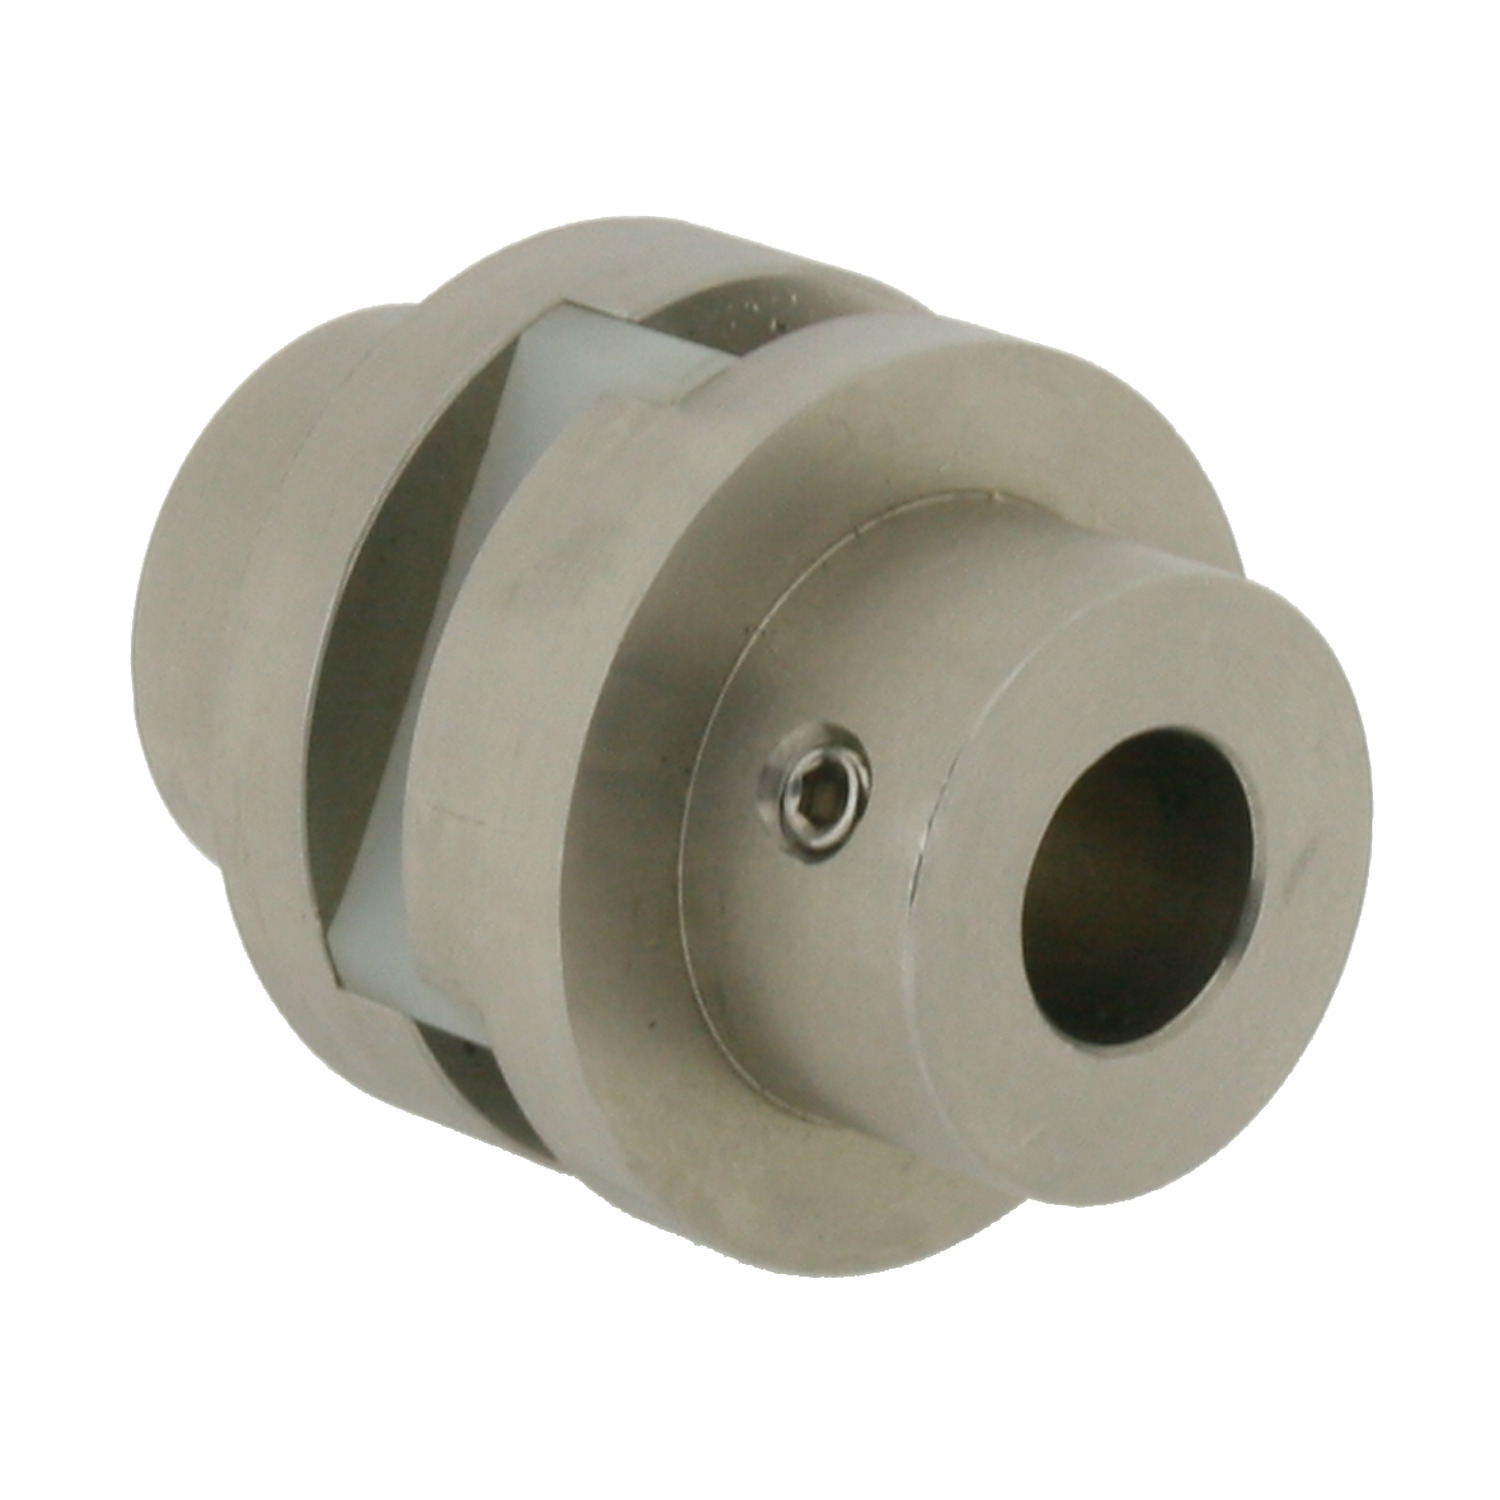 Product R3054.1, Oldham Coupling with Carbon Resin Insert / 